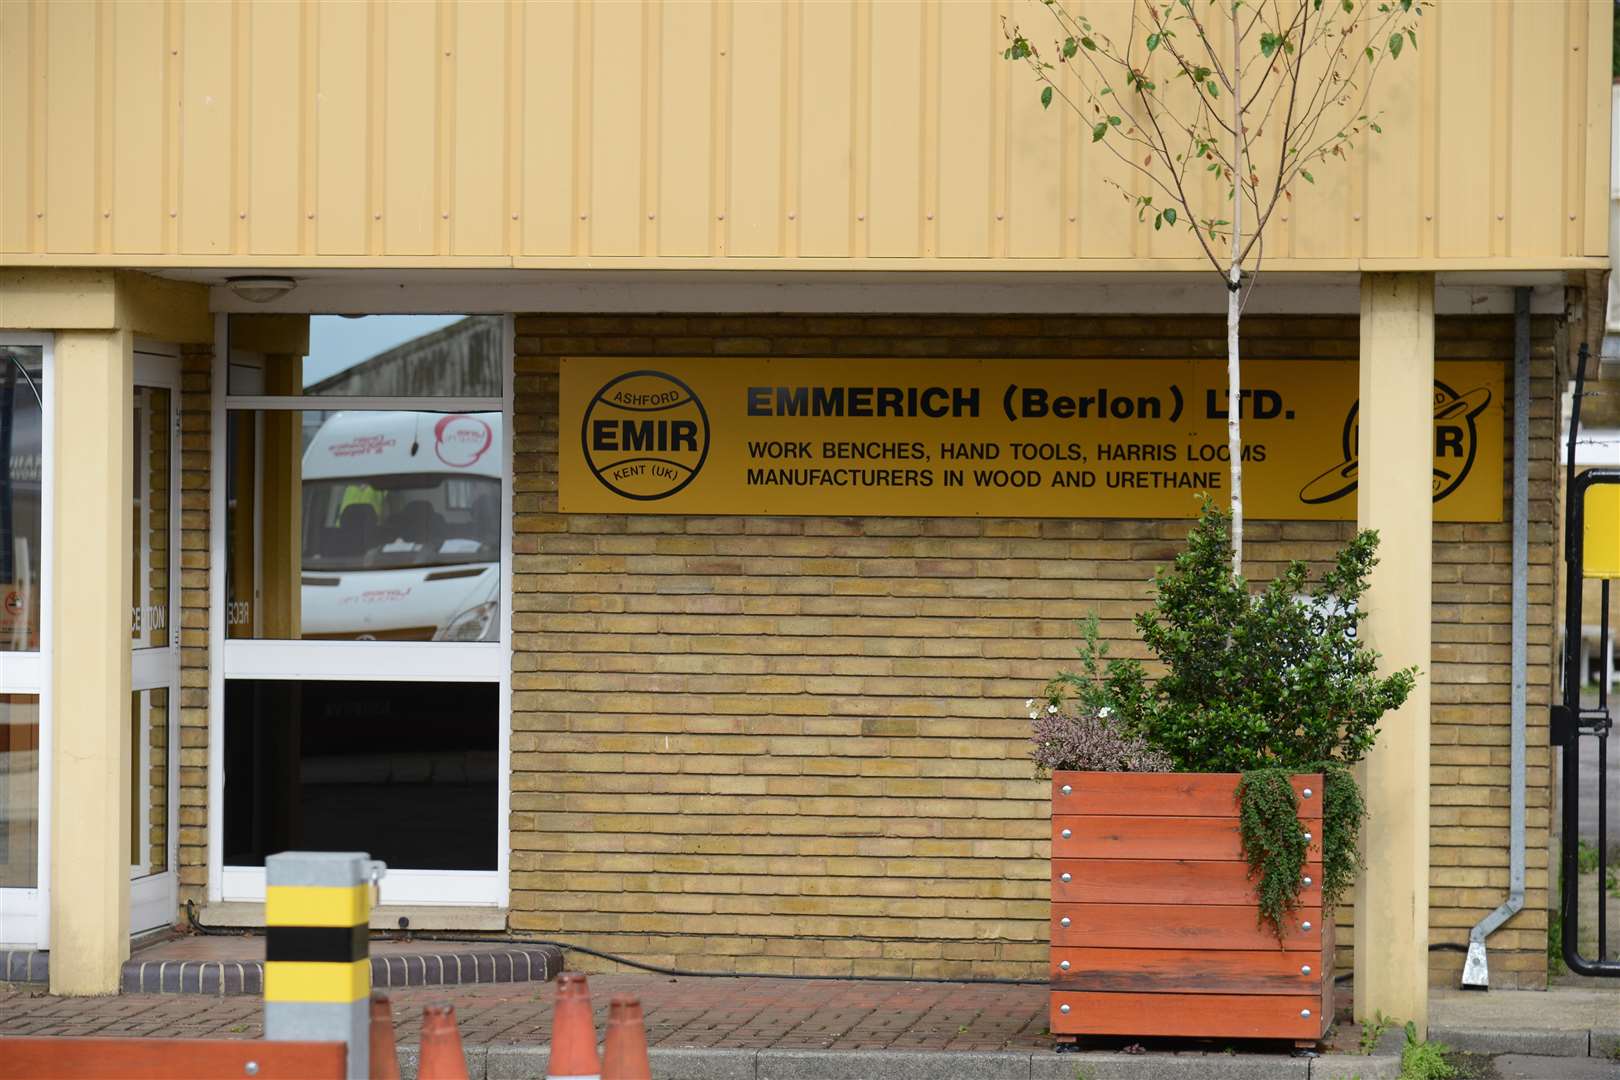 Staff at Emmerich (Berlon) have been given redundancy notices